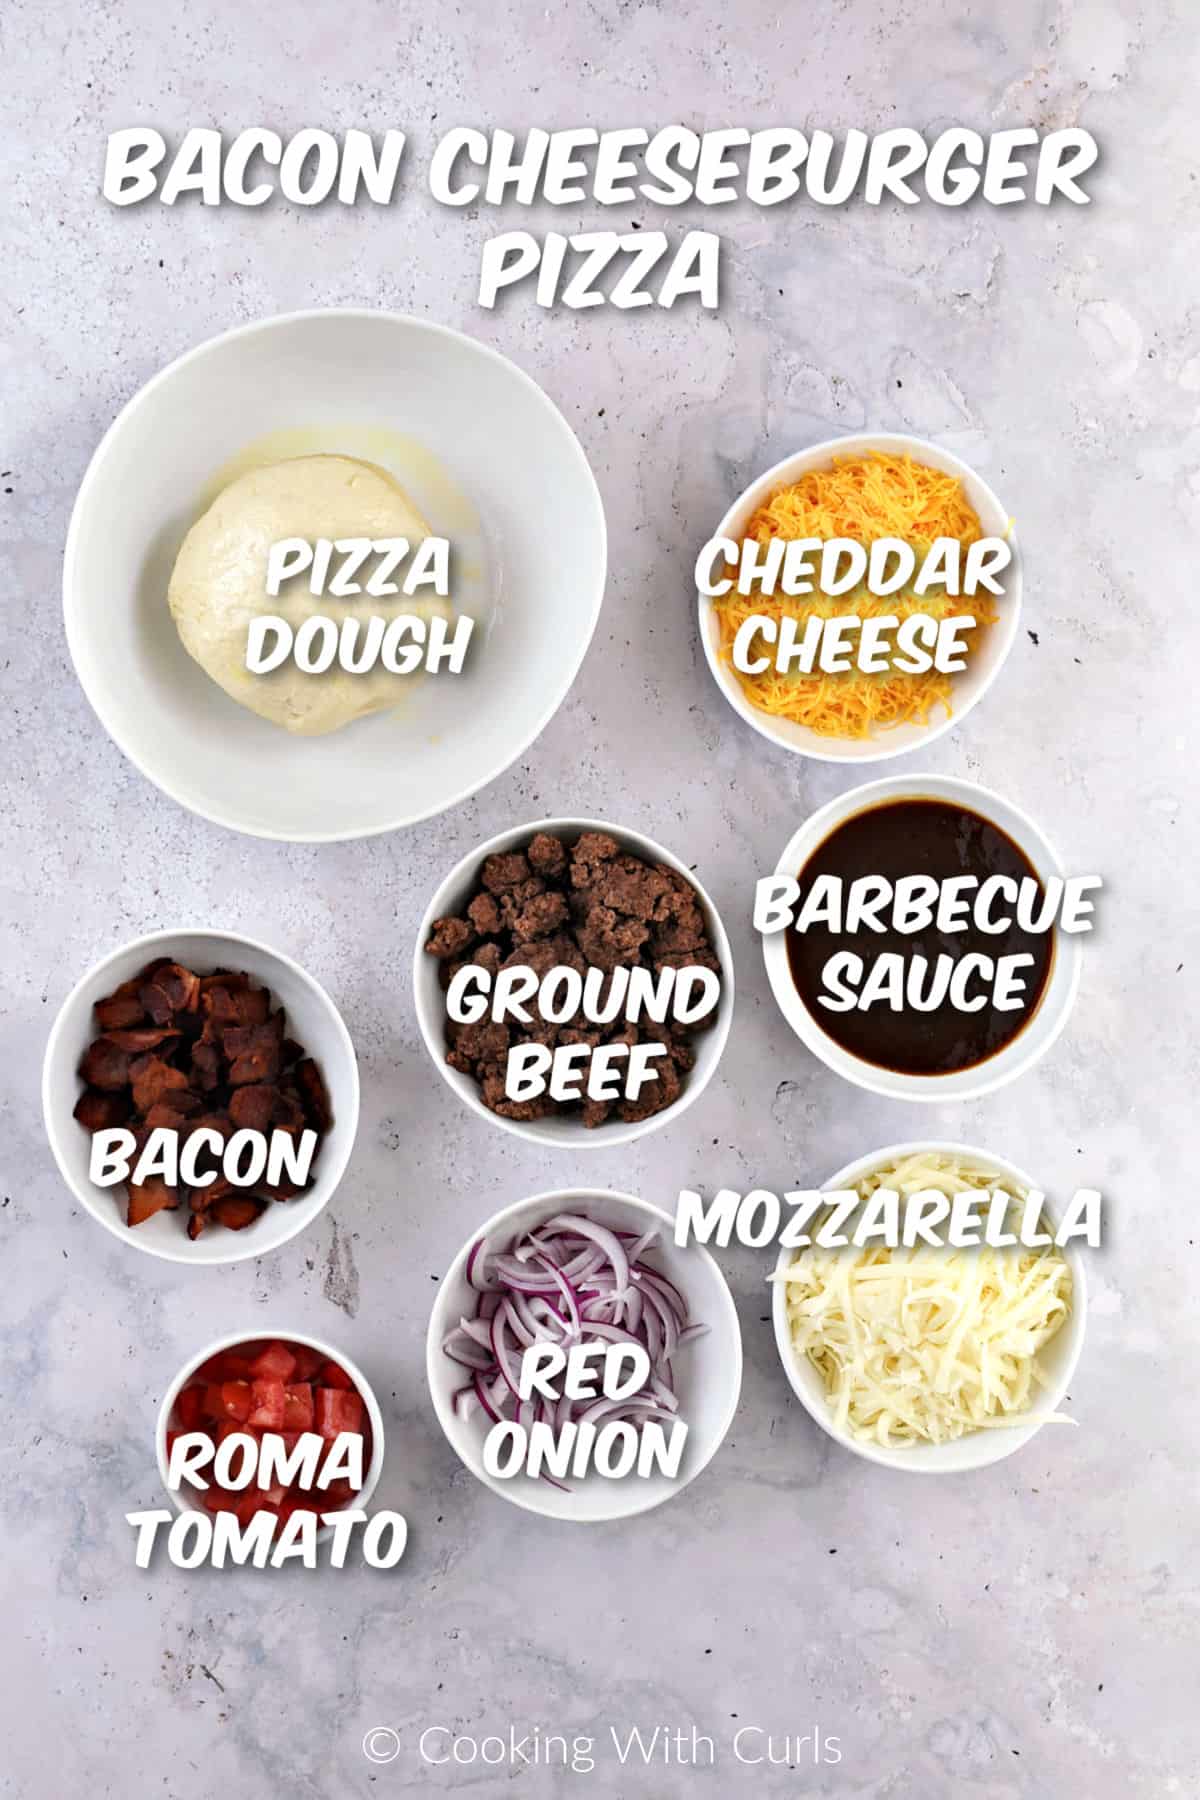 Ingredients to make bacon cheeseburger pizza.